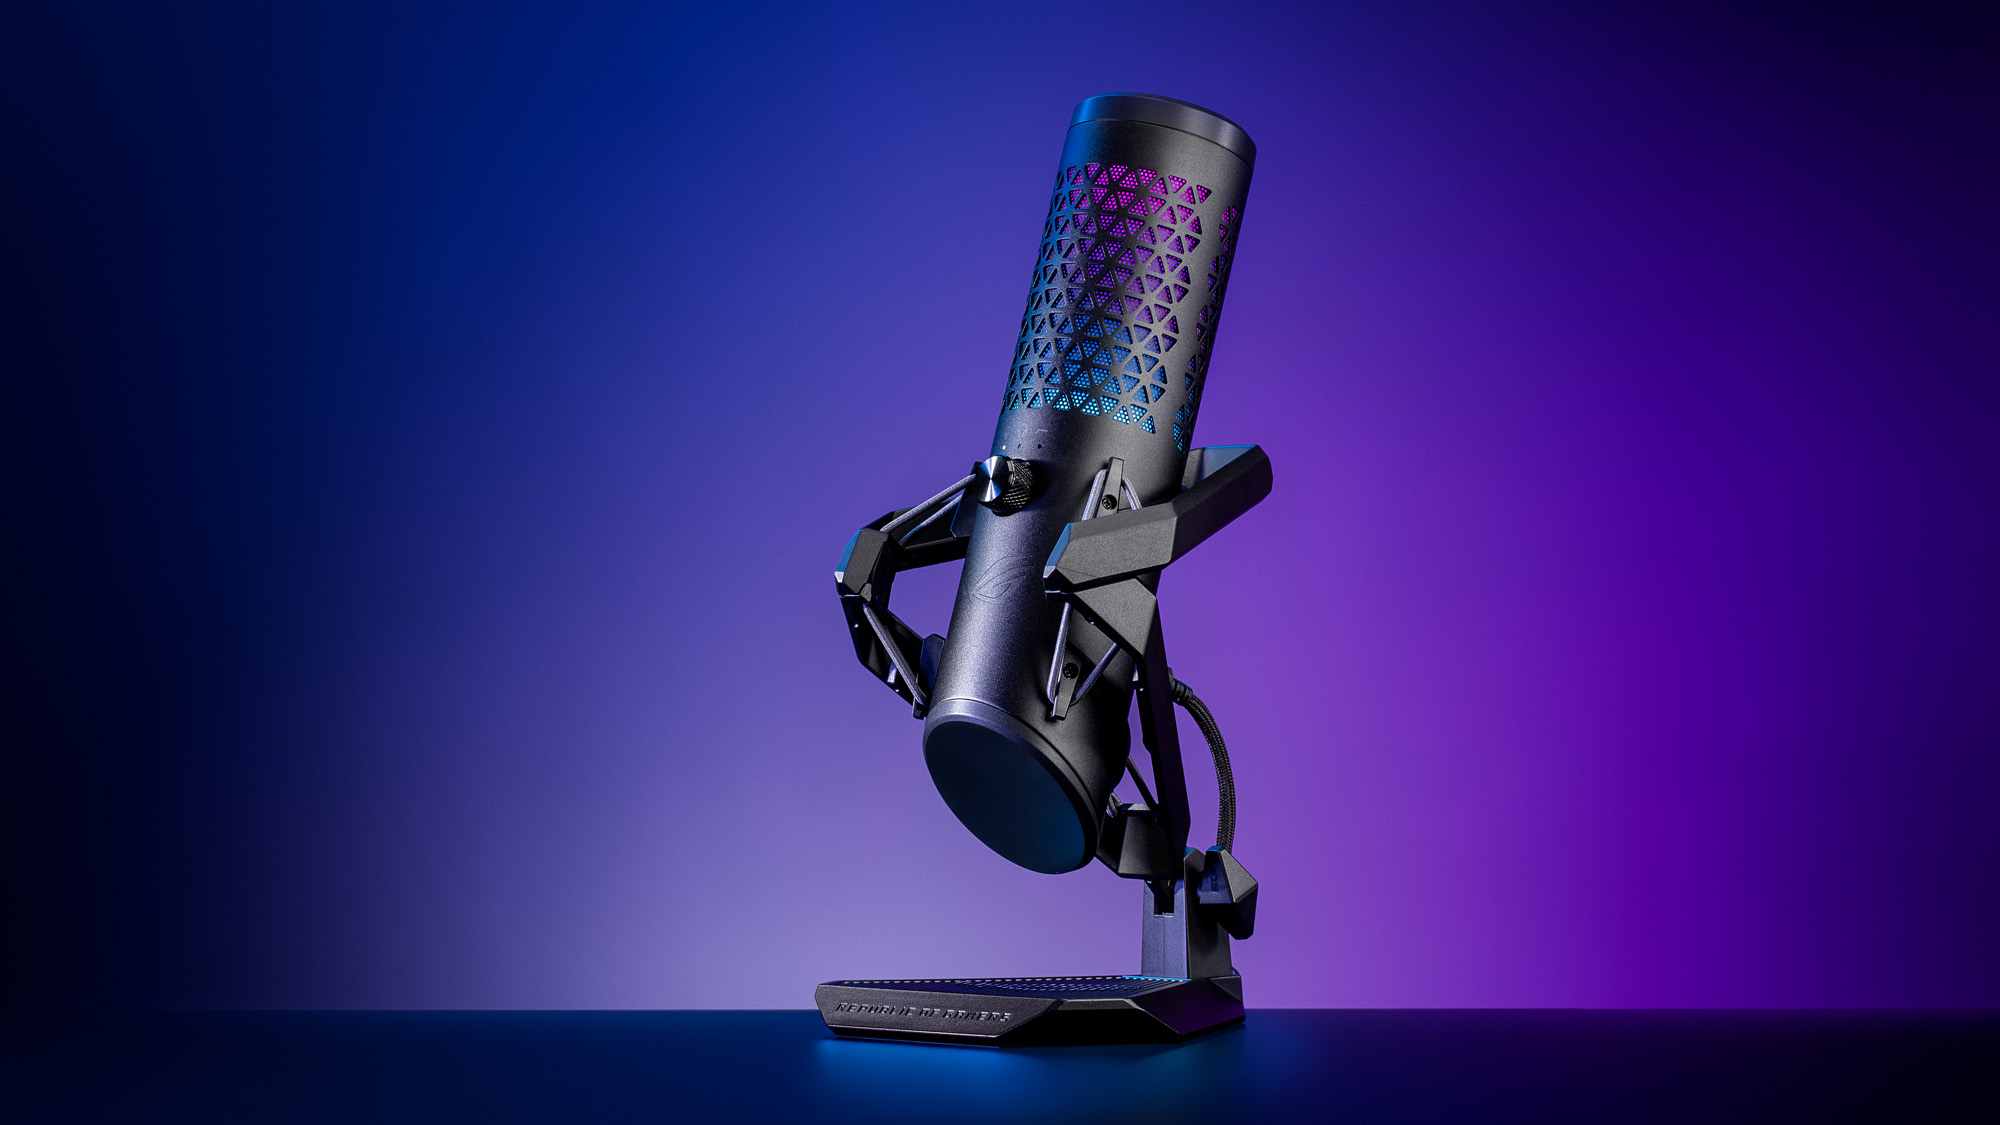 The black ROG Carnyx microphone sitting on a desk with a purple background.